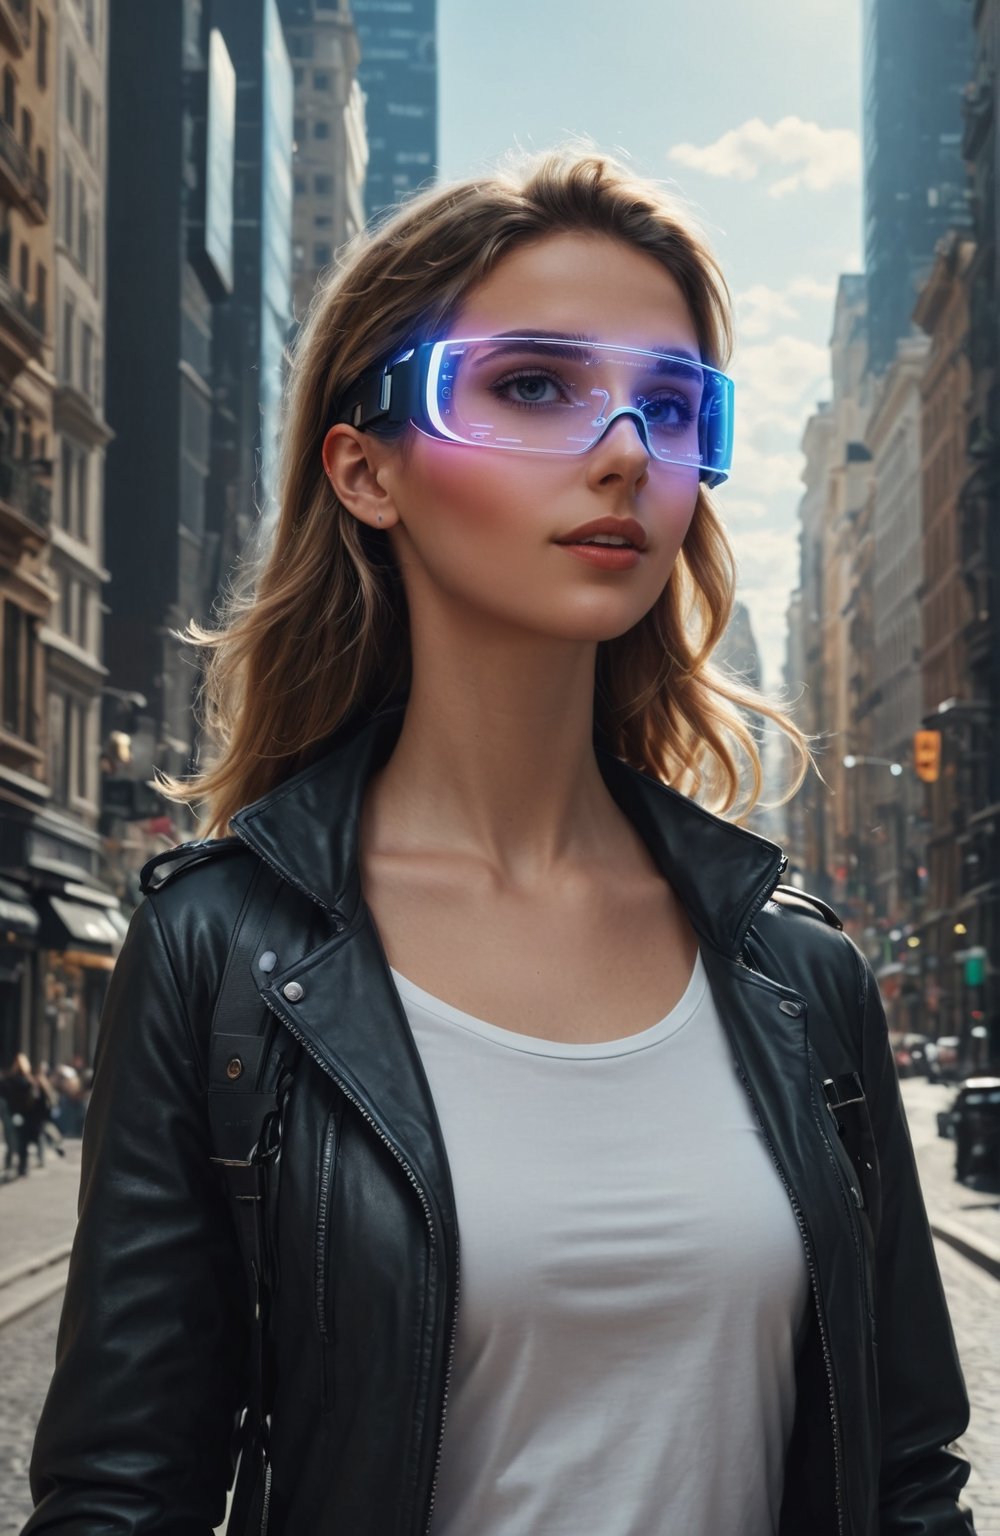 A young woman walks through a city with augmented reality glasses and organizes a trip with a digital assistant. highly detailed, photorealistic, hyperreal, cinematic atmosphere.